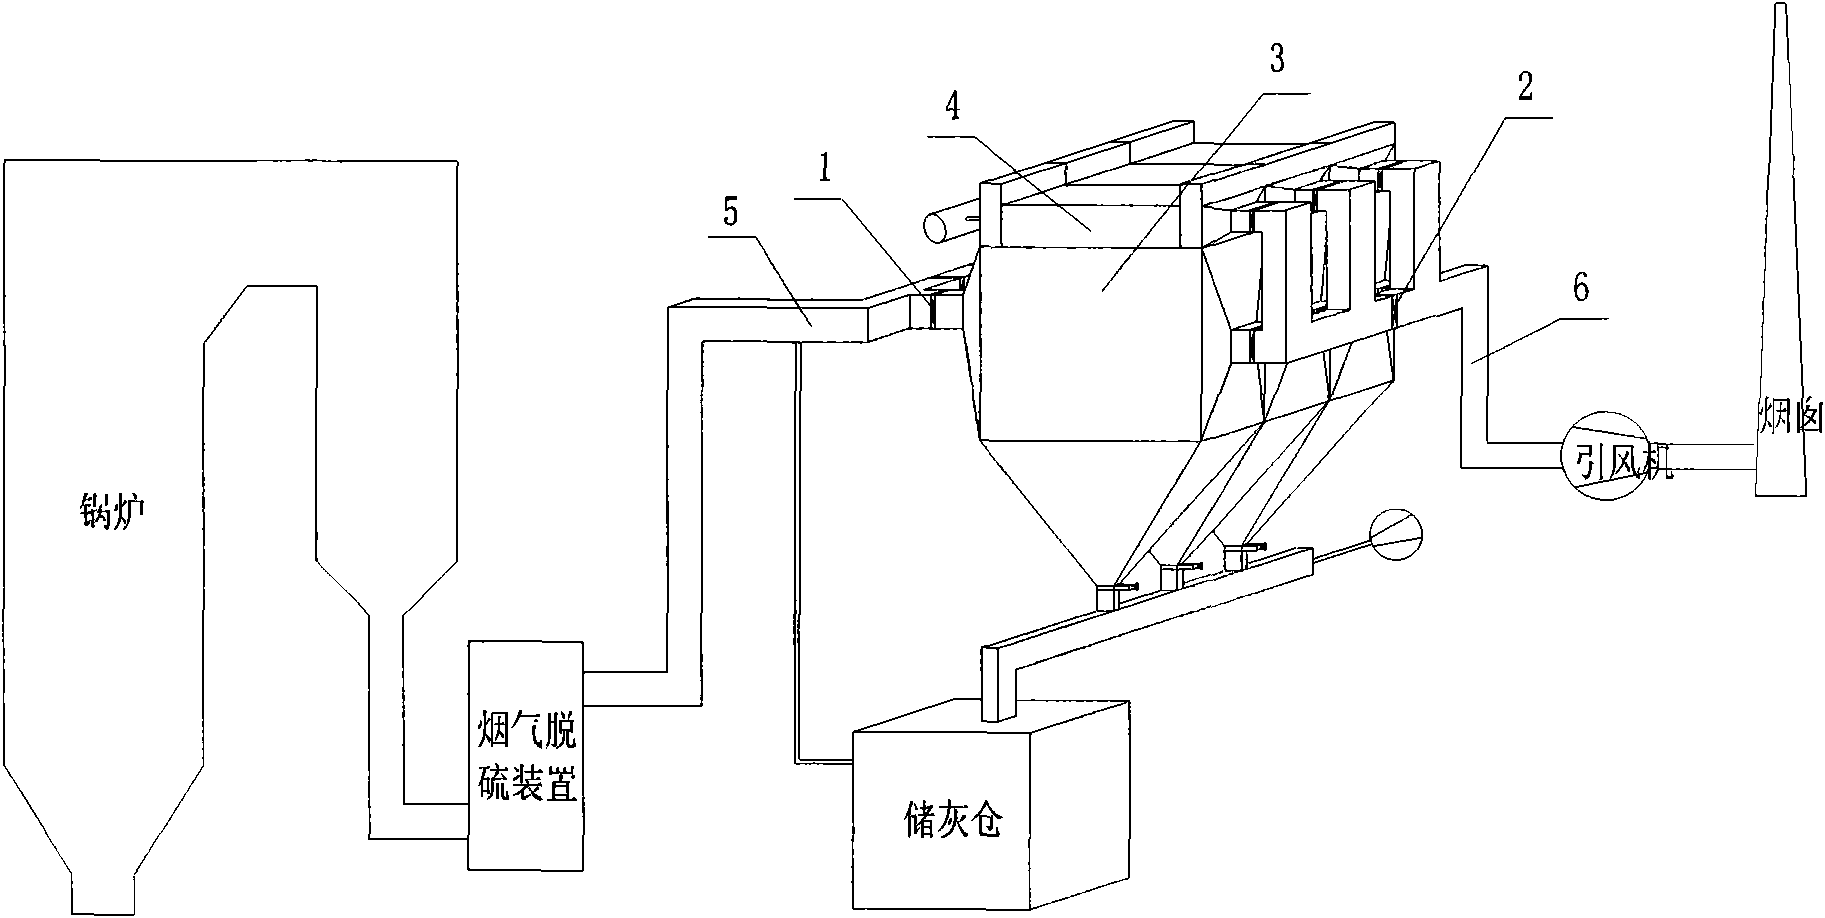 Static hop-pocket mixed dust removal device and control method thereof